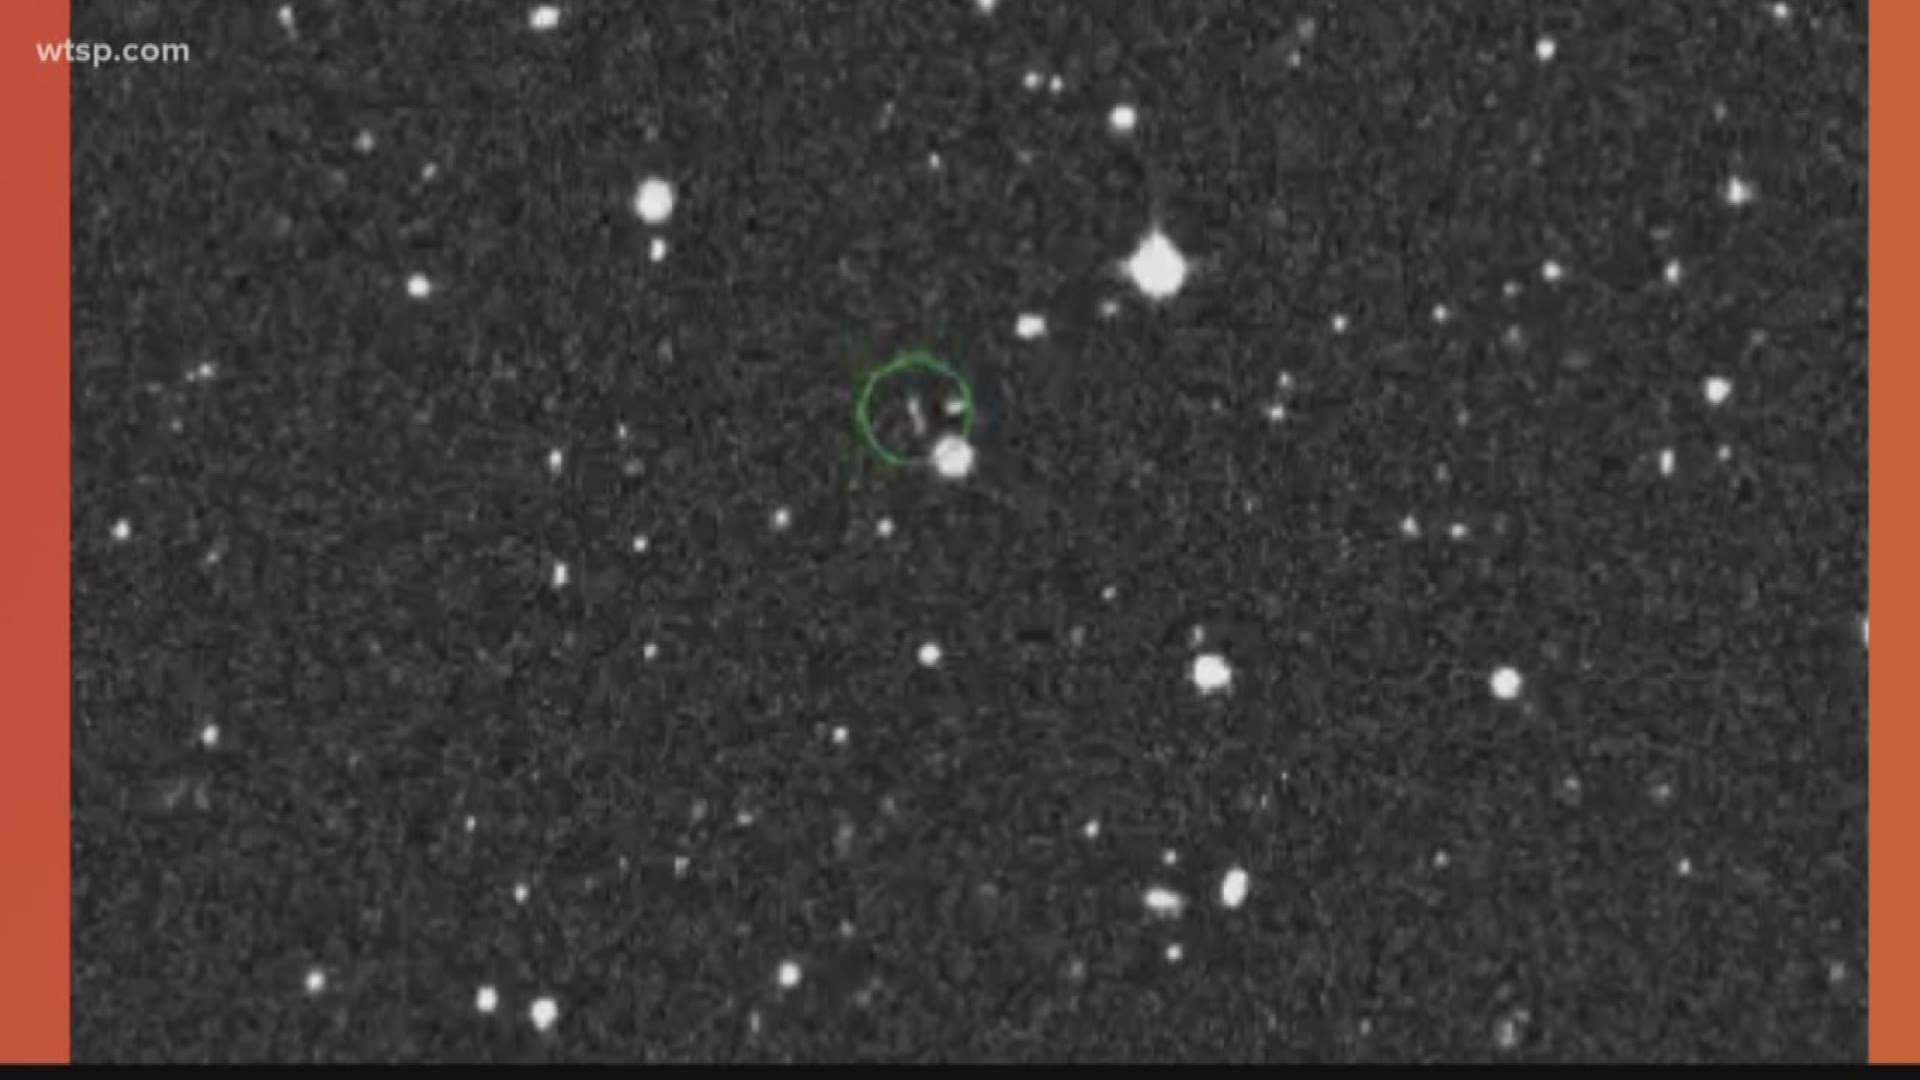 Researchers Kacper Wierzchos and Teddy Pruyne said the asteroid -- about 6-11 feet in diameter -- was observed on Feb. 15.